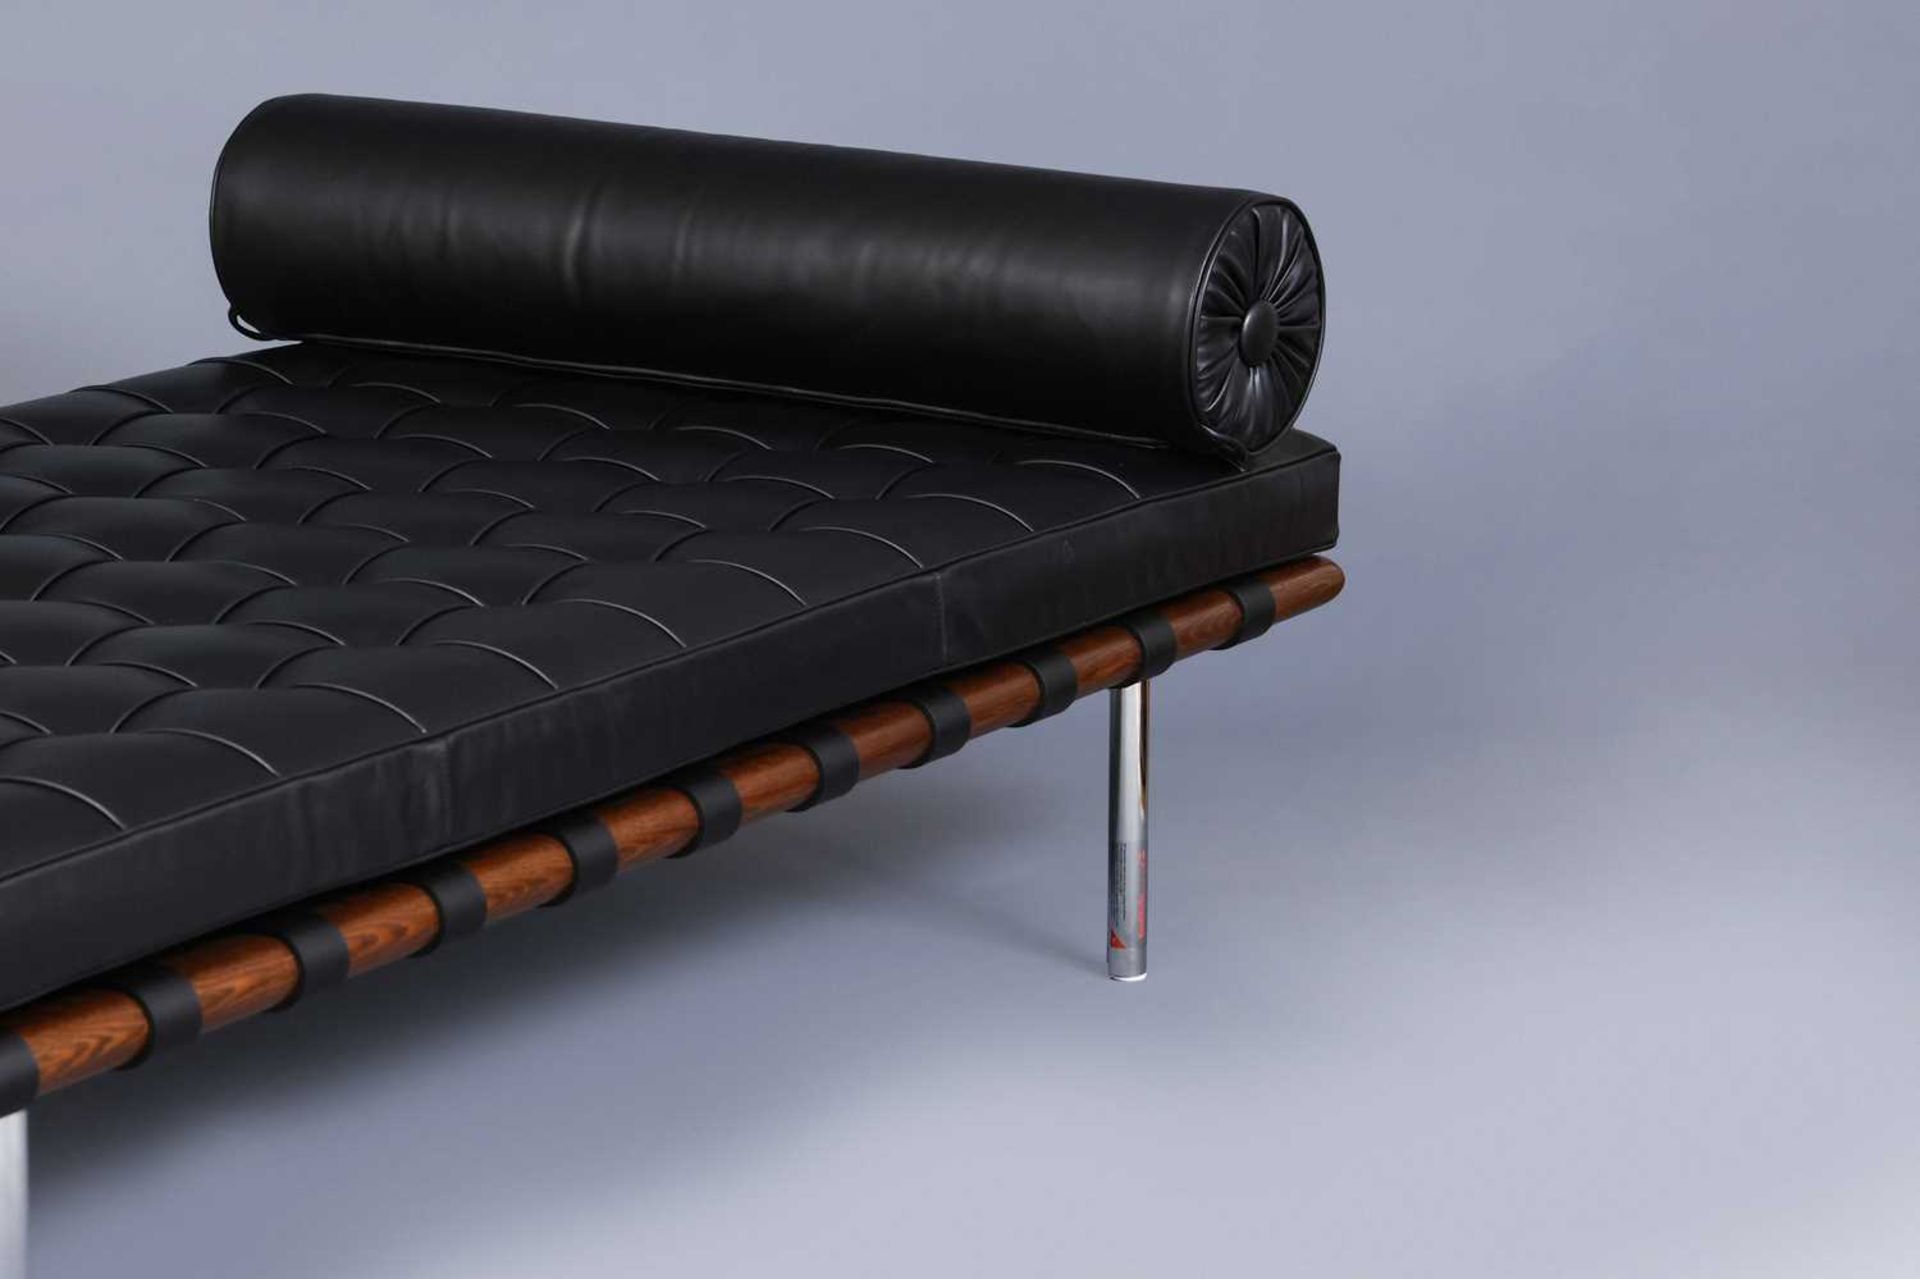 KNOLL "Barcelona" Daybed - Image 2 of 6